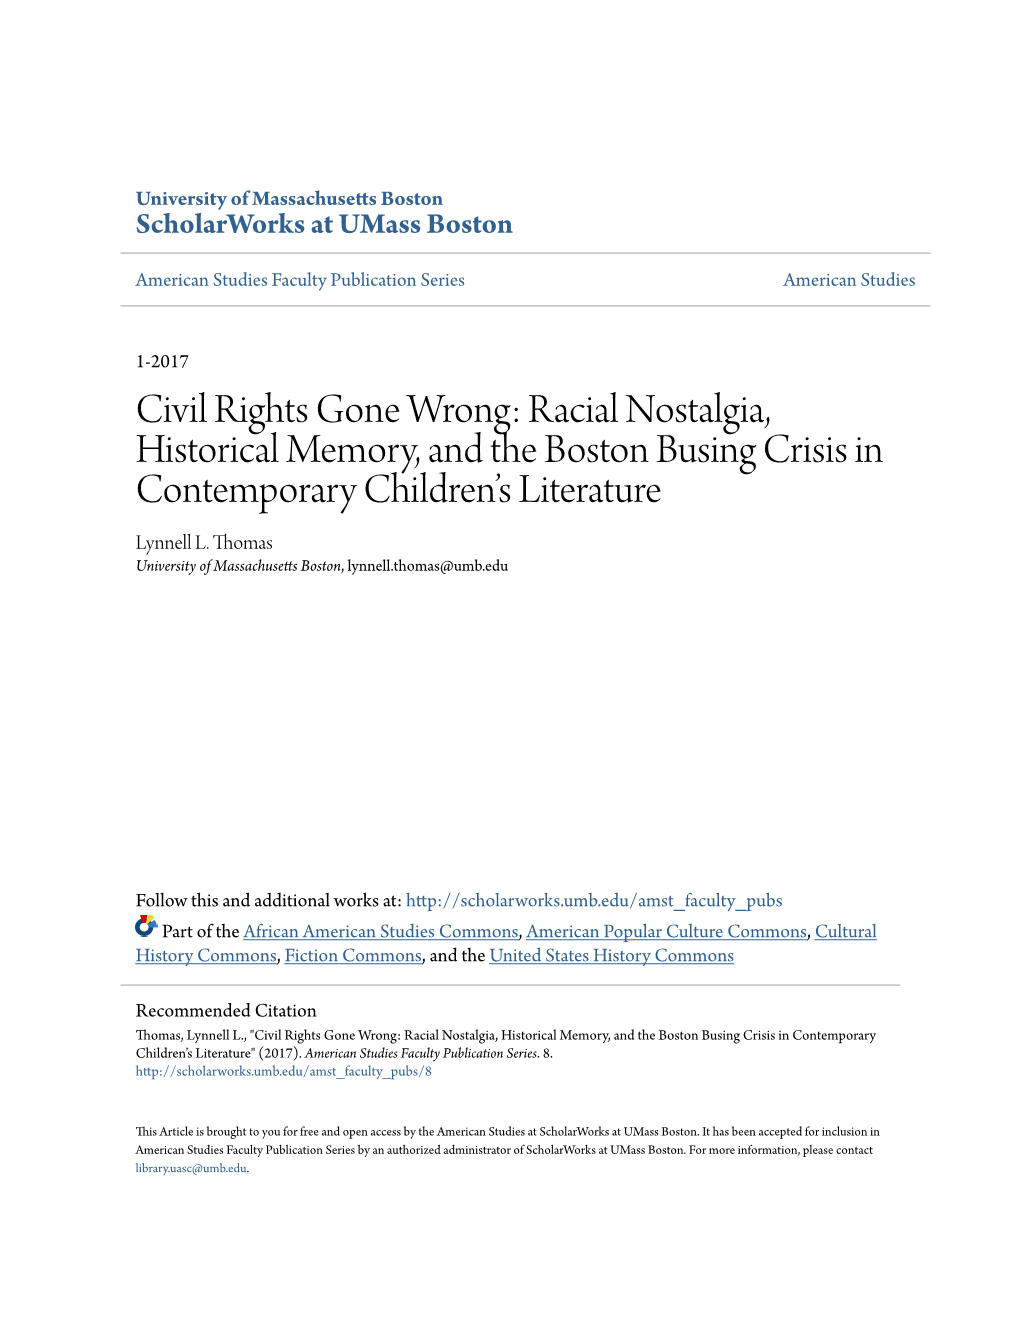 Civil Rights Gone Wrong: Racial Nostalgia, Historical Memory, and the Boston Busing Crisis in Contemporary Children’S Literature Lynnell L